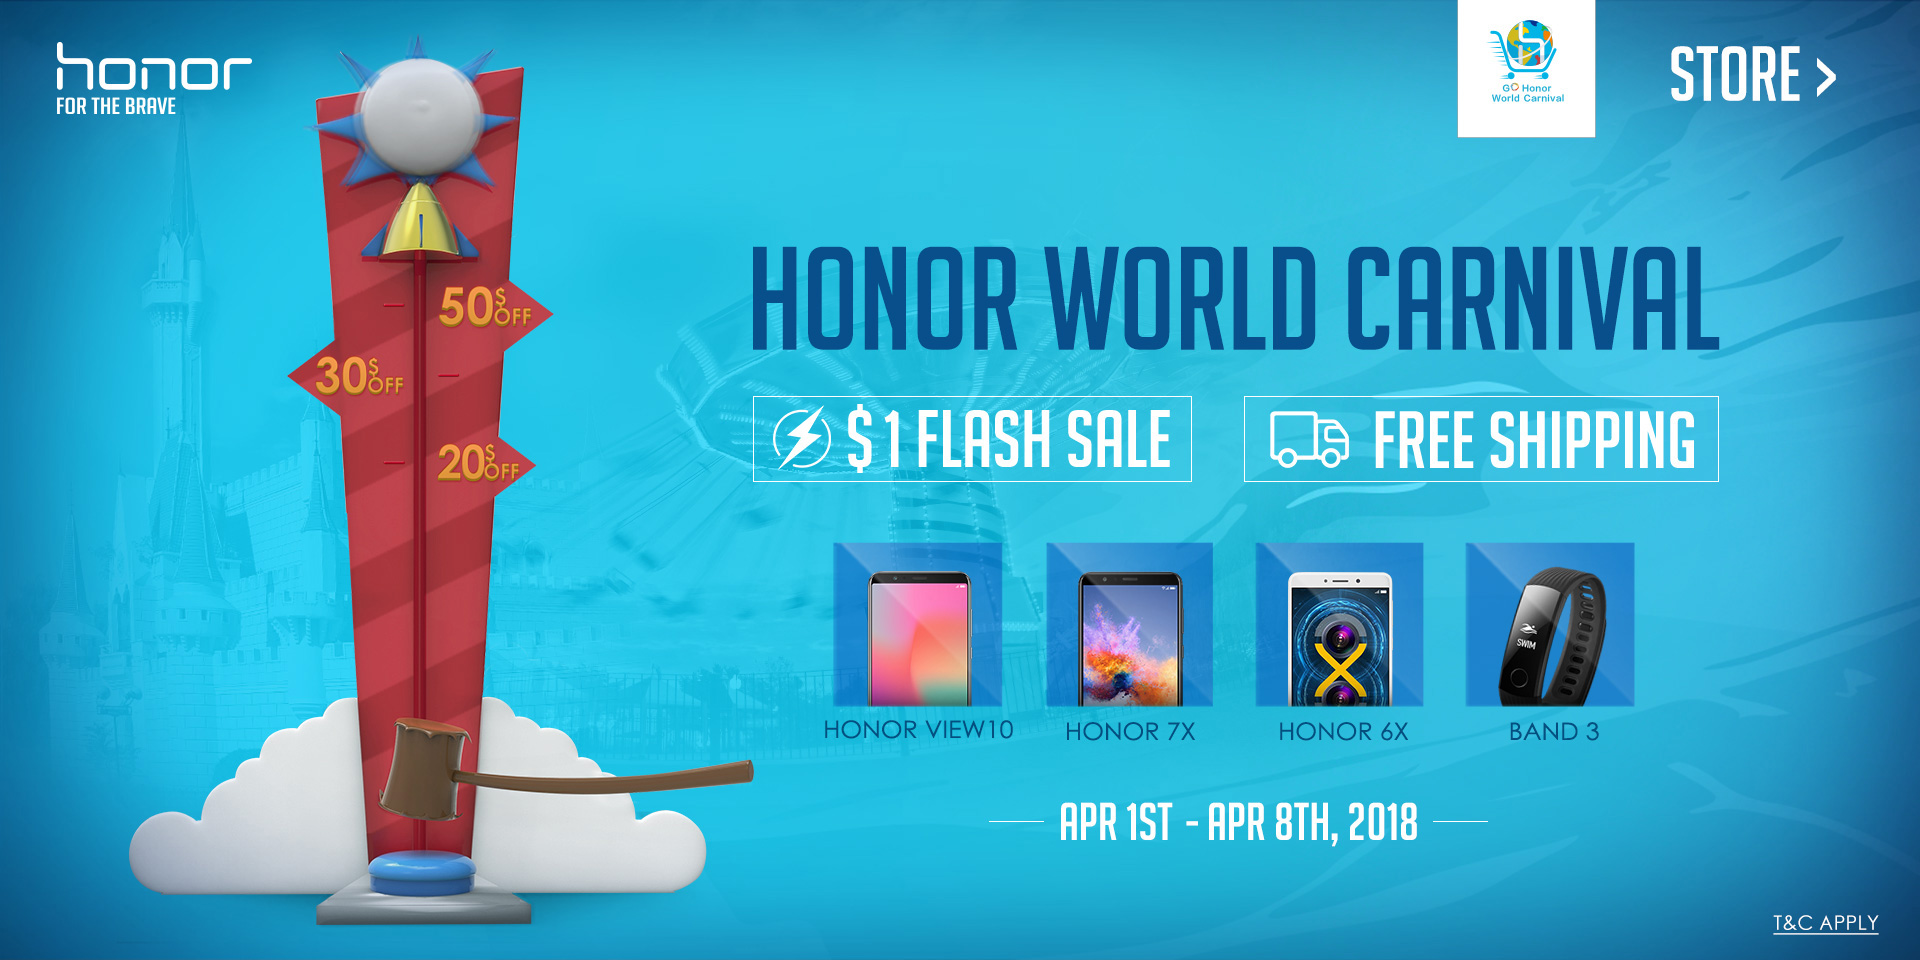 Grab a Honor 7X smartphone for just $1 at tomorrow's flash sale 5